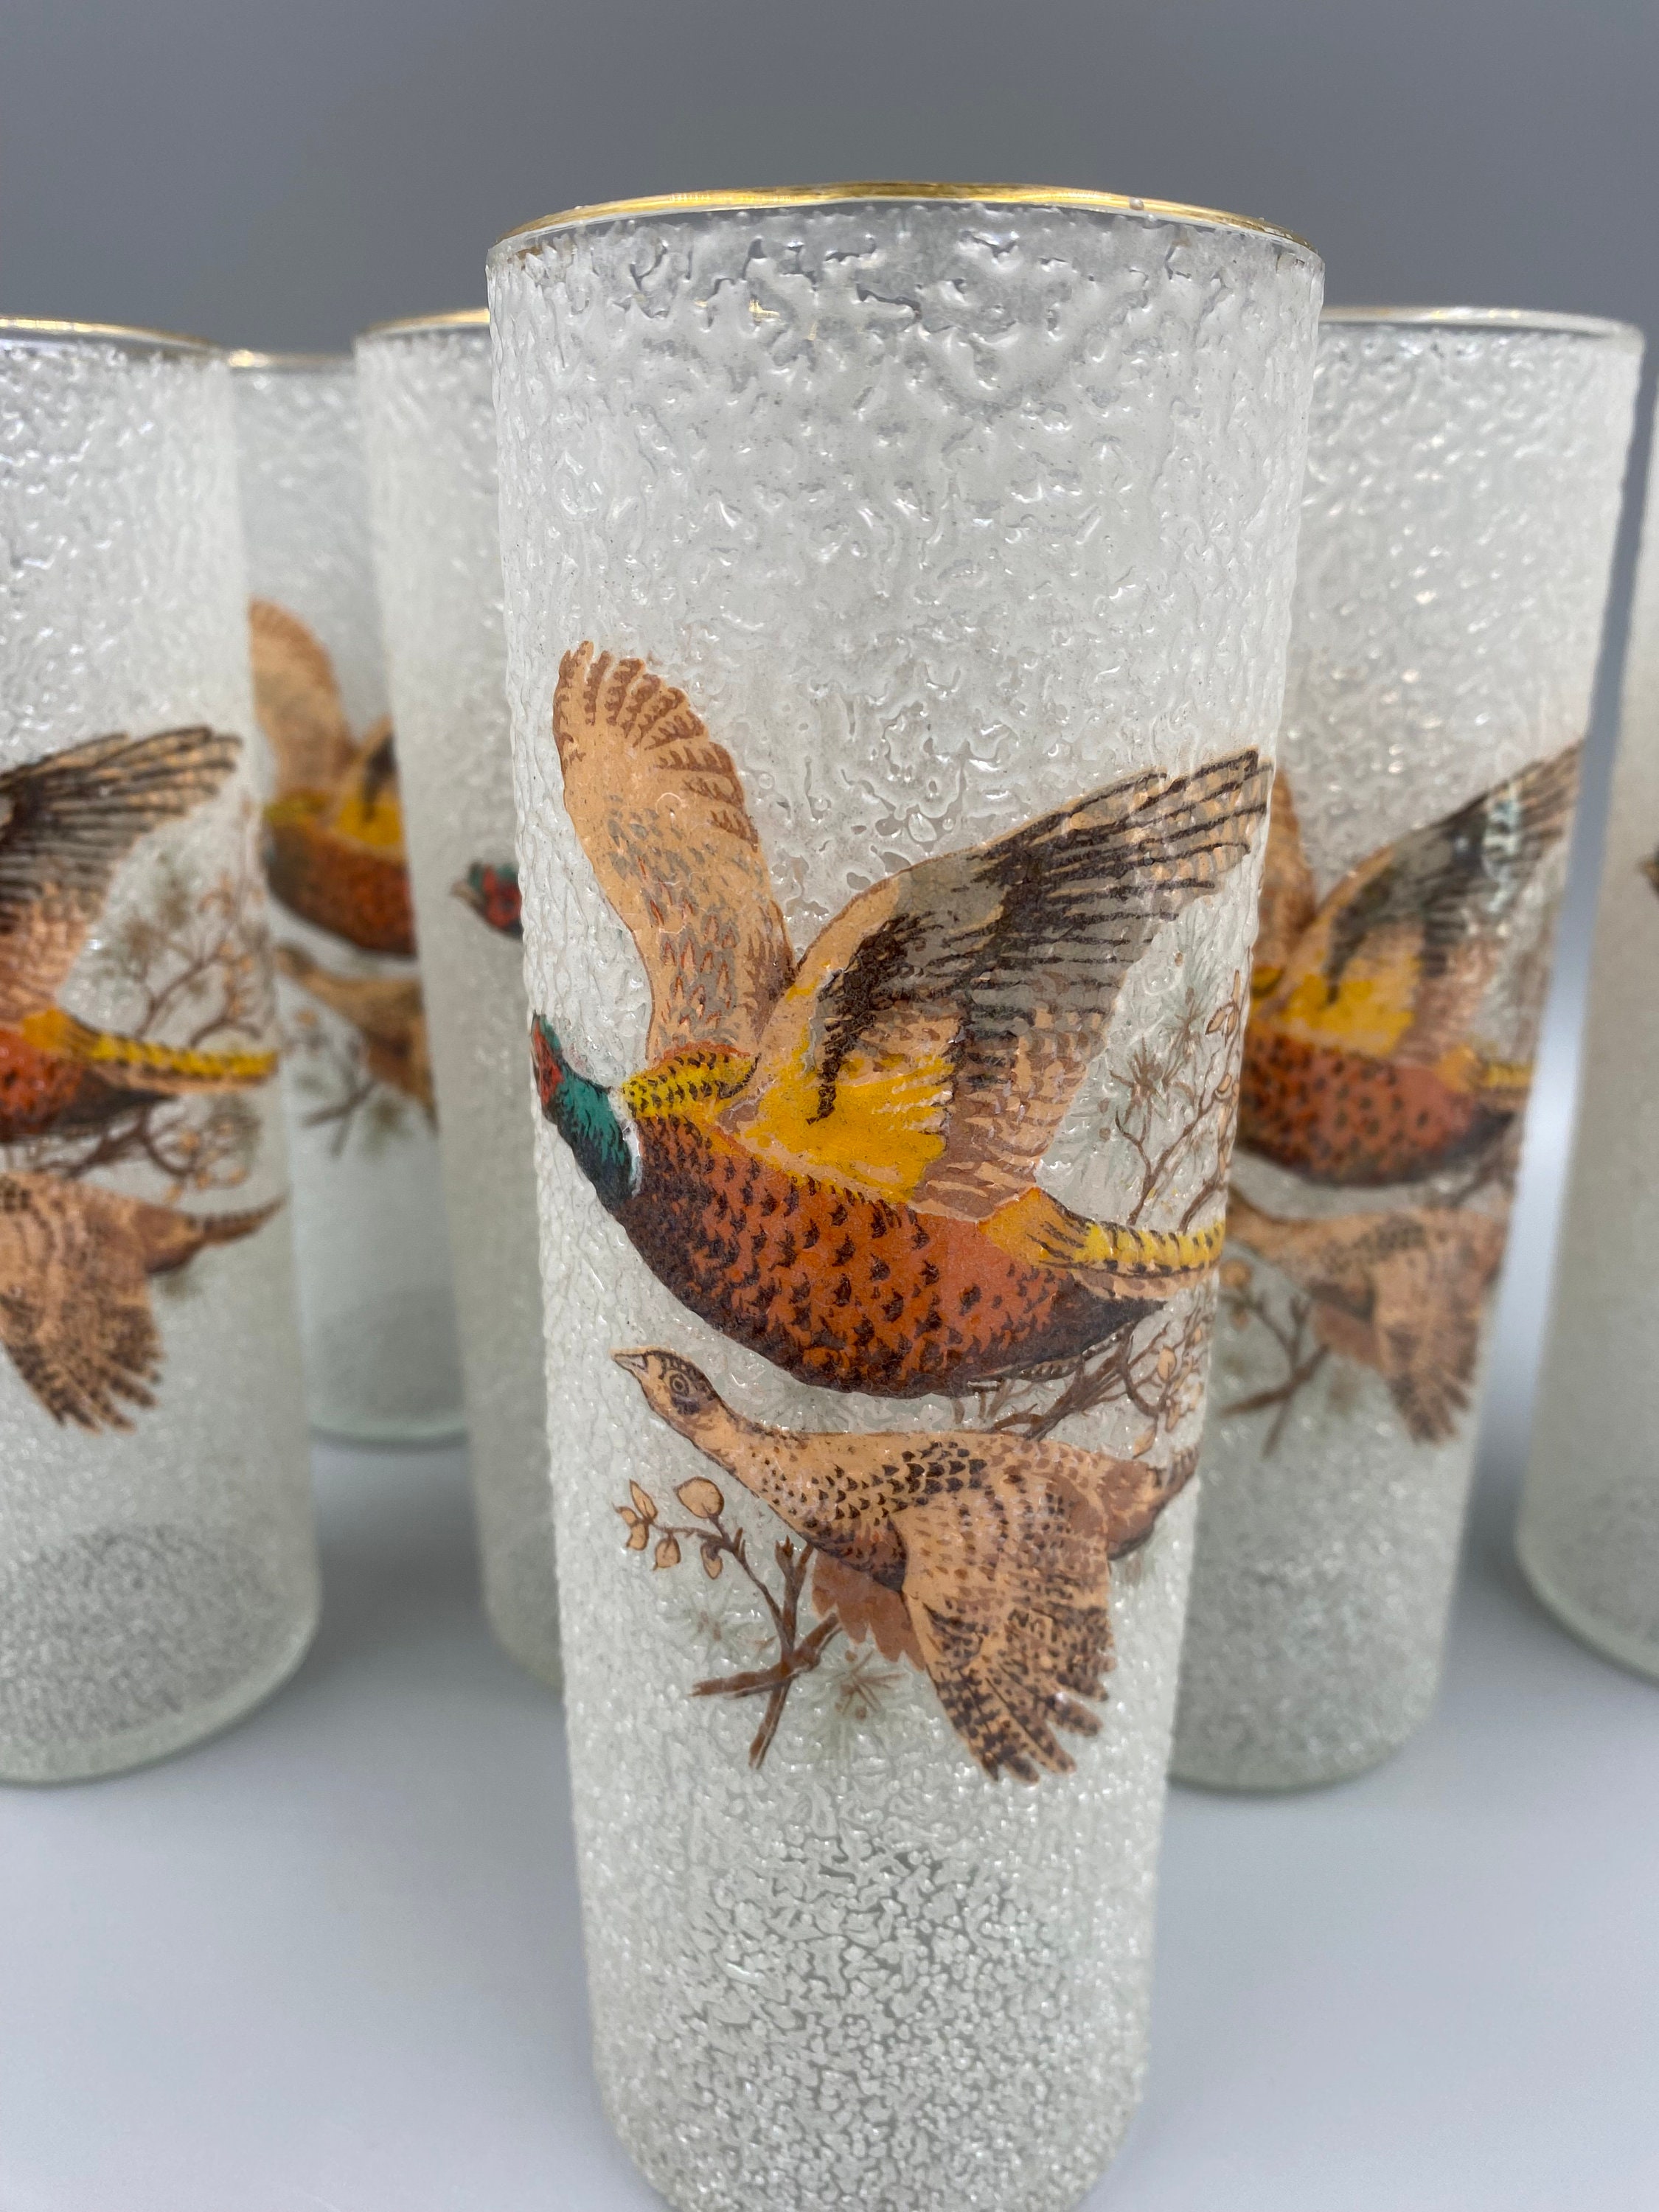 Set of 6 Gold and Red Pheasant Vintage Drinking GLASSES Mid